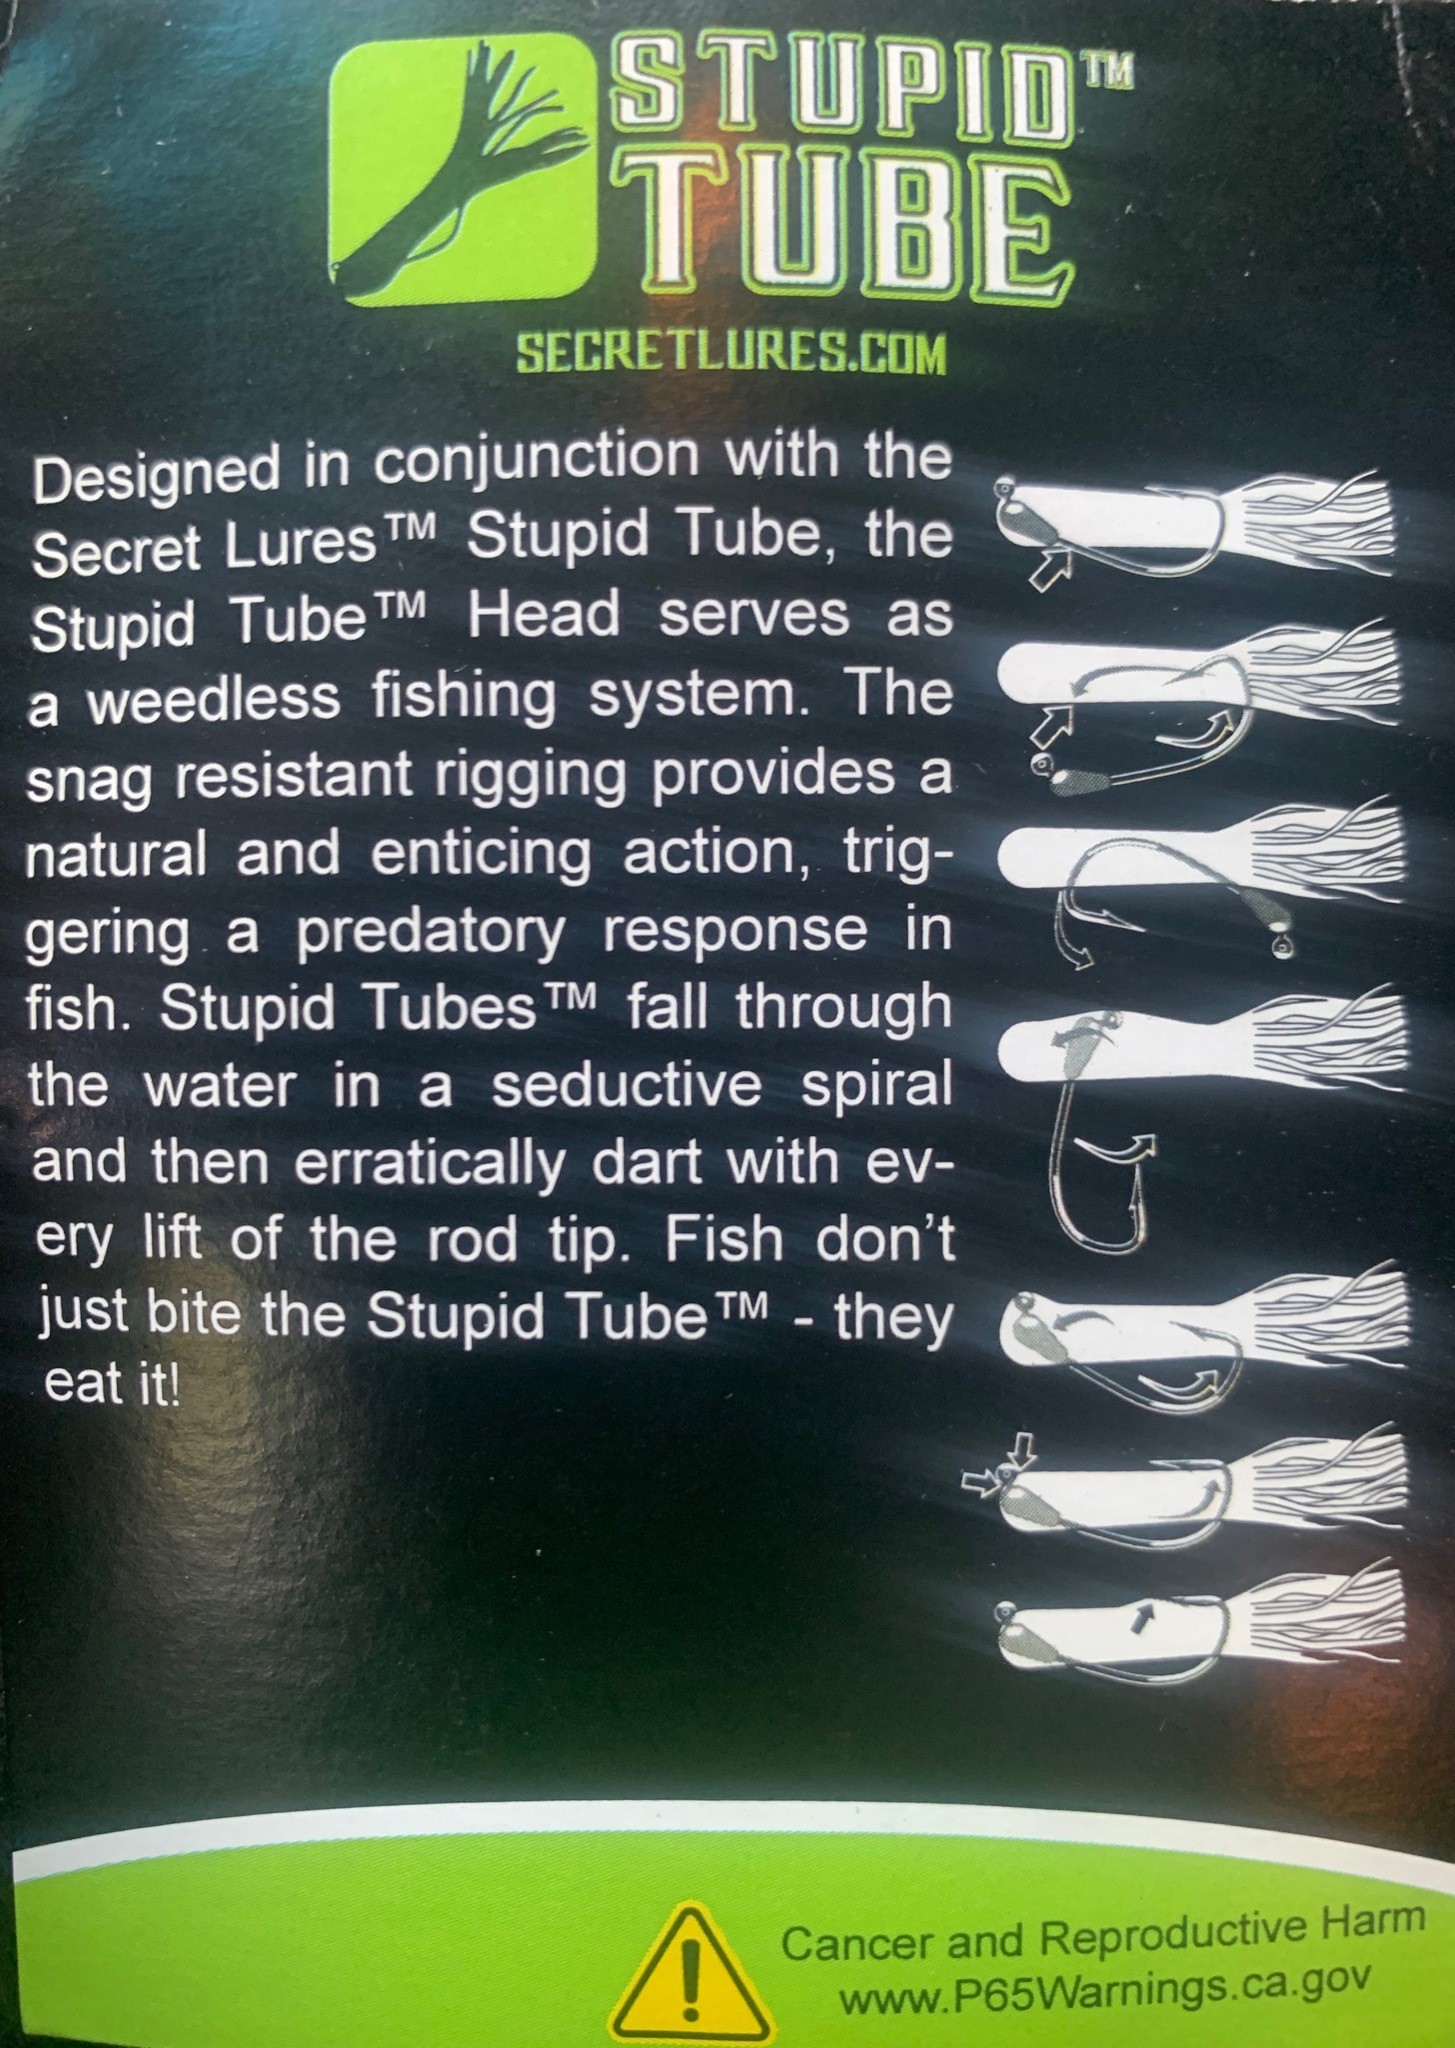 Fishing The Stupid Tube Is A Smart Move  The Ultimate Bass Fishing  Resource Guide® LLC